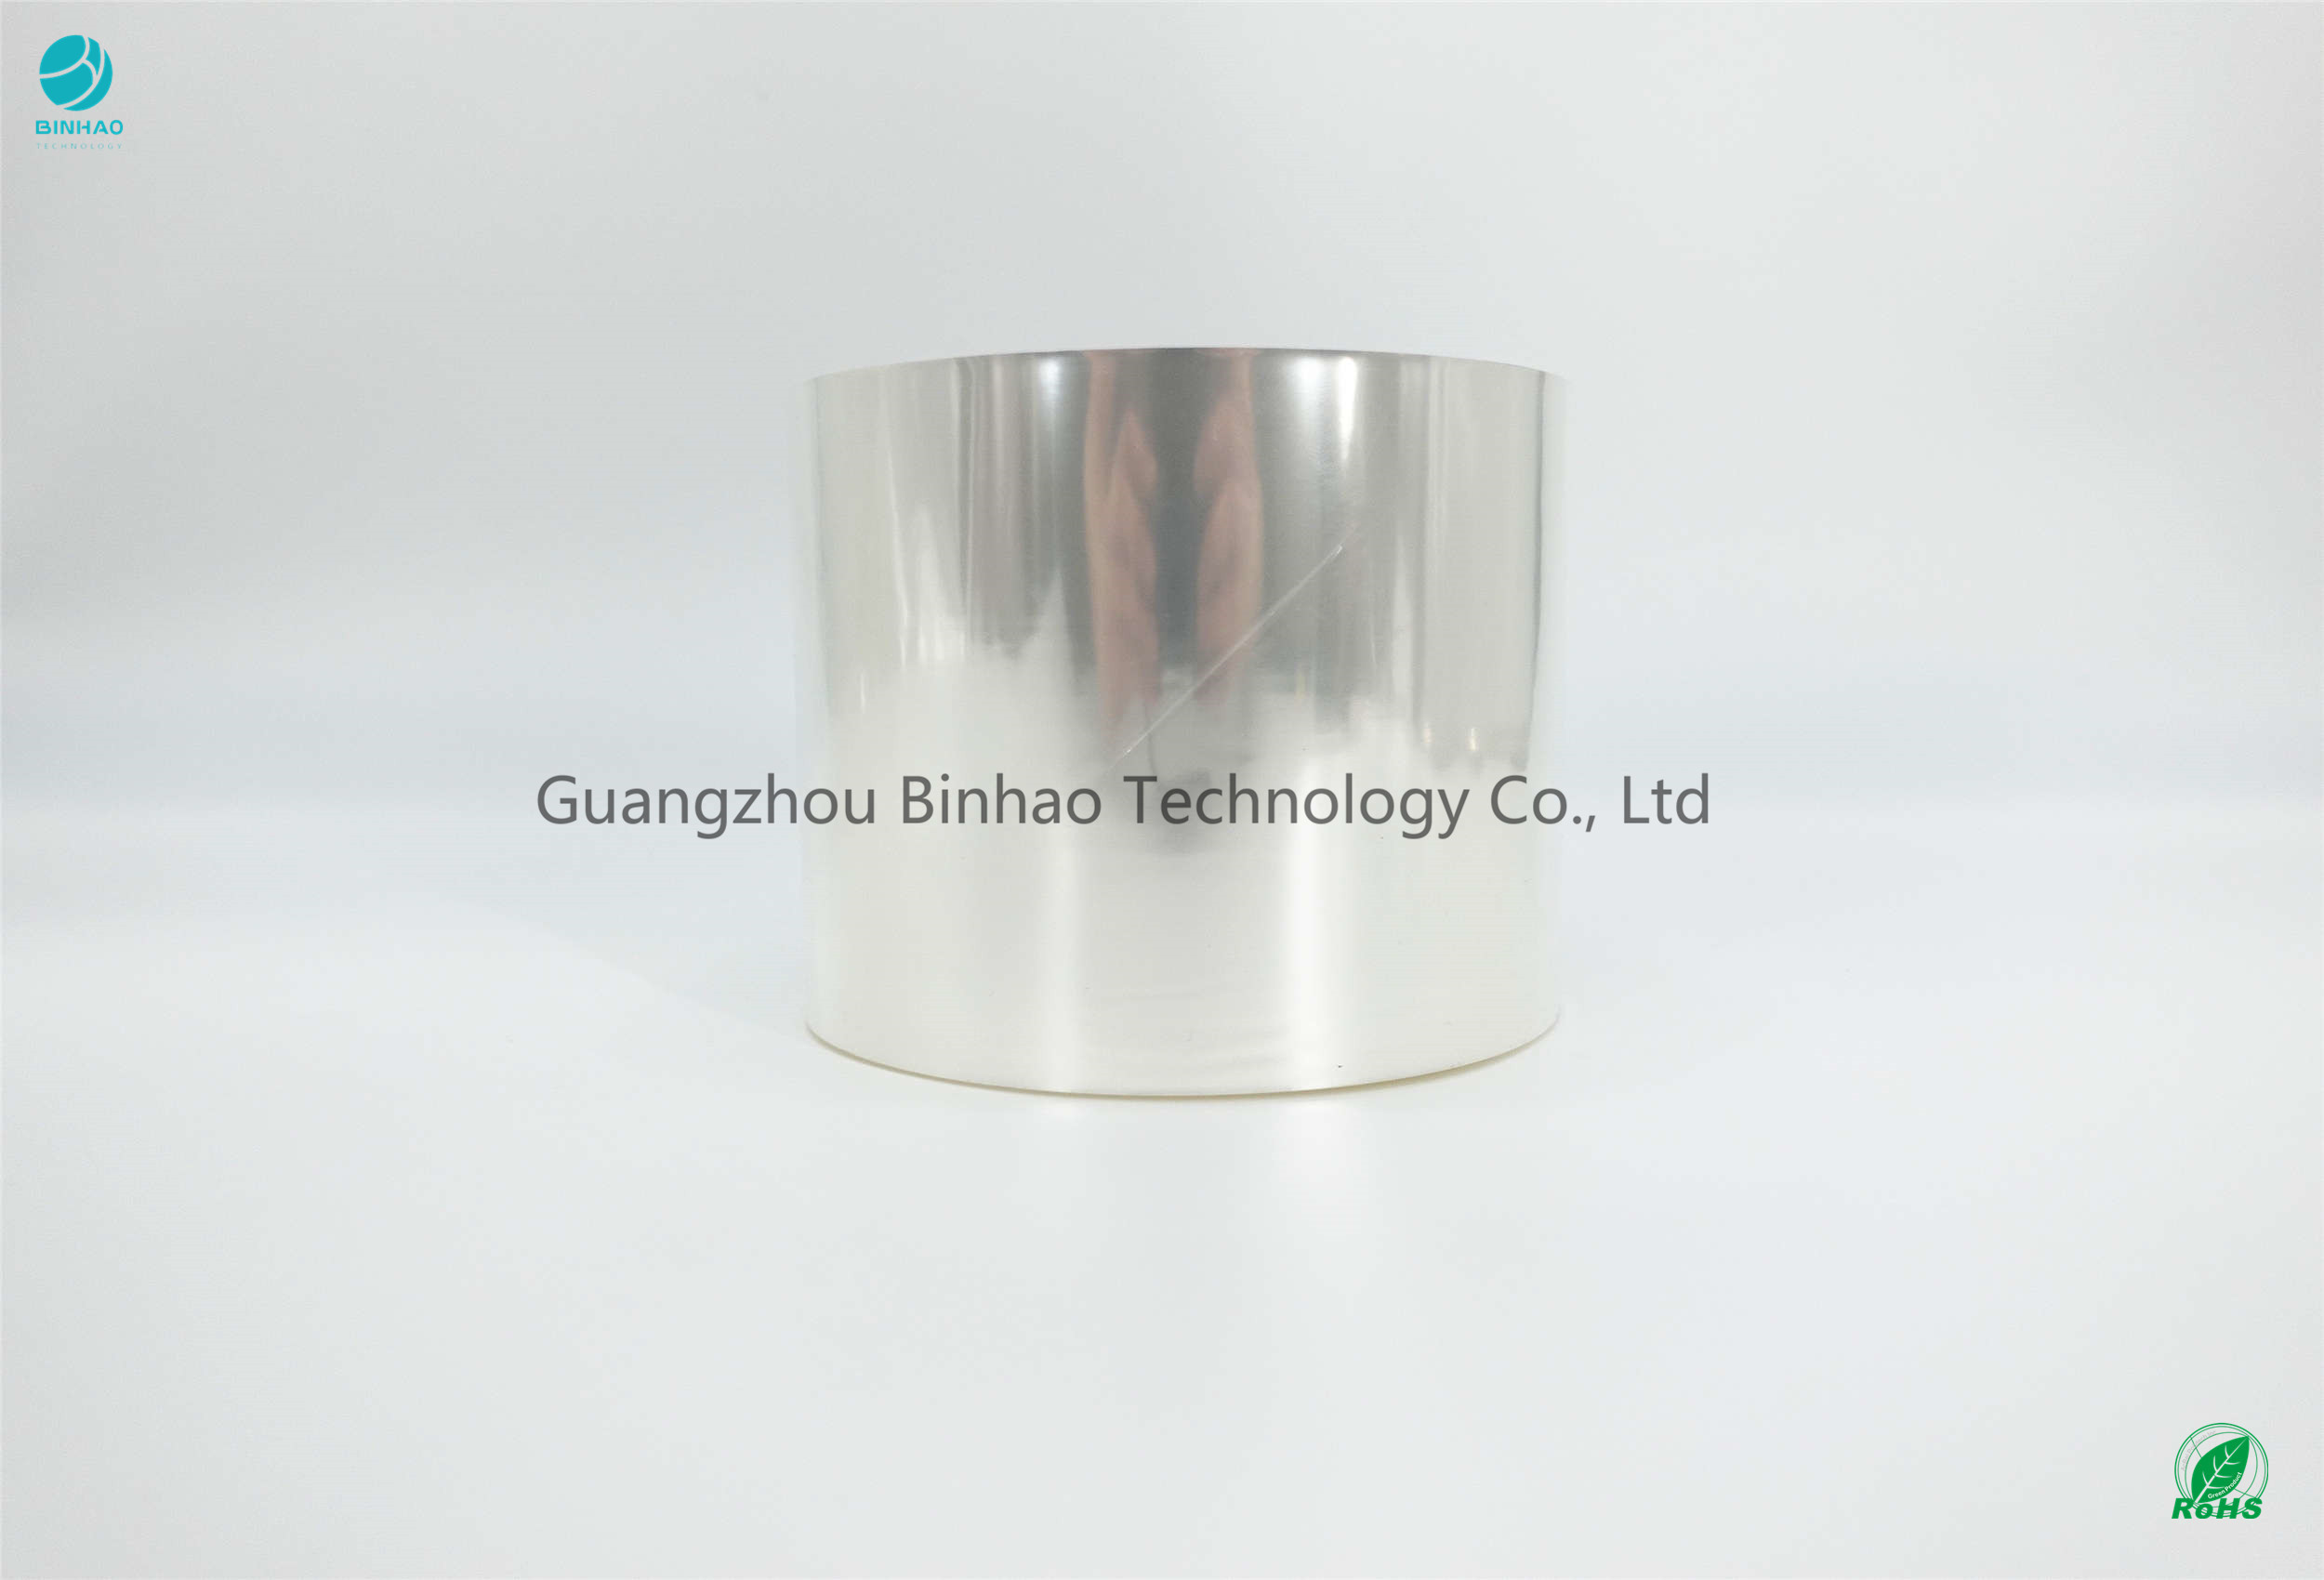 High Function Cigarette Biaxially Oriented Polypropylene BOPP Film Shining Lucency